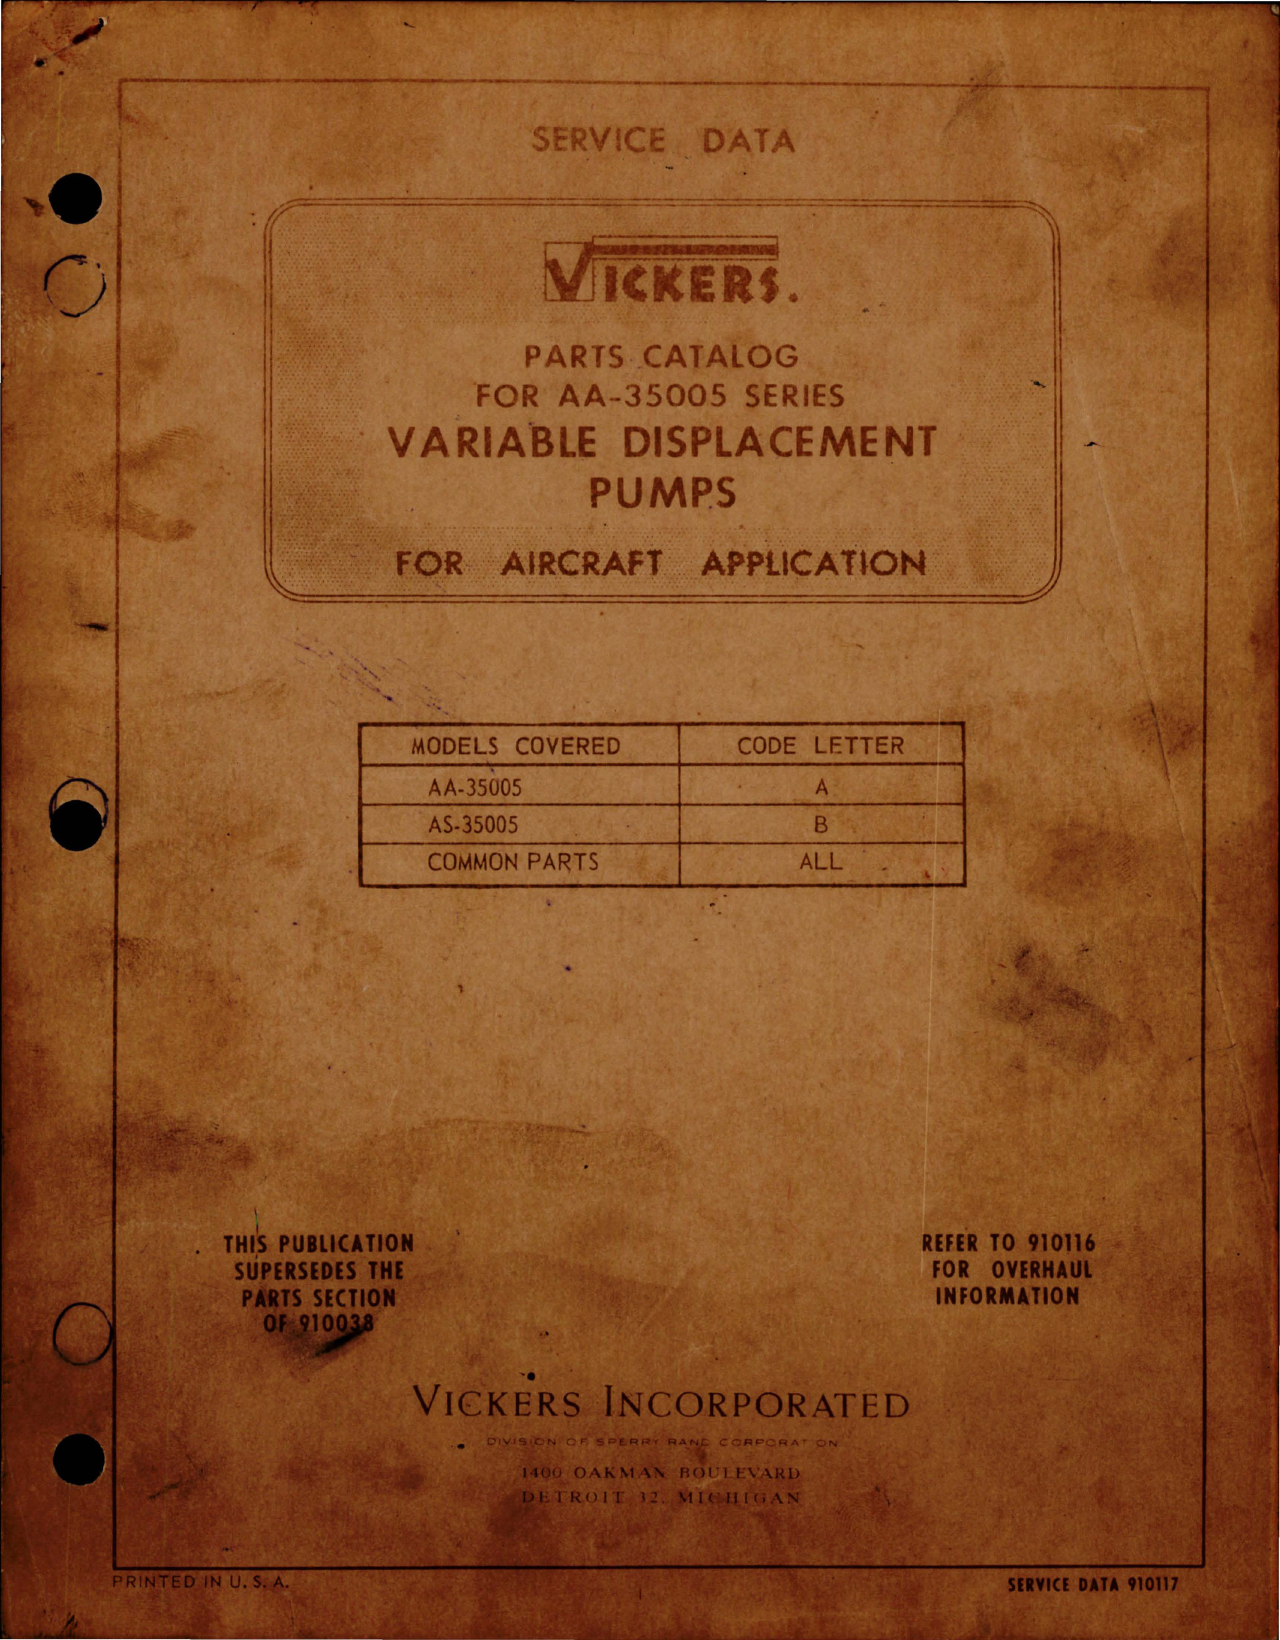 Sample page 1 from AirCorps Library document: Parts Catalog for Variable Displacement Pumps - AA- 350058 Series 